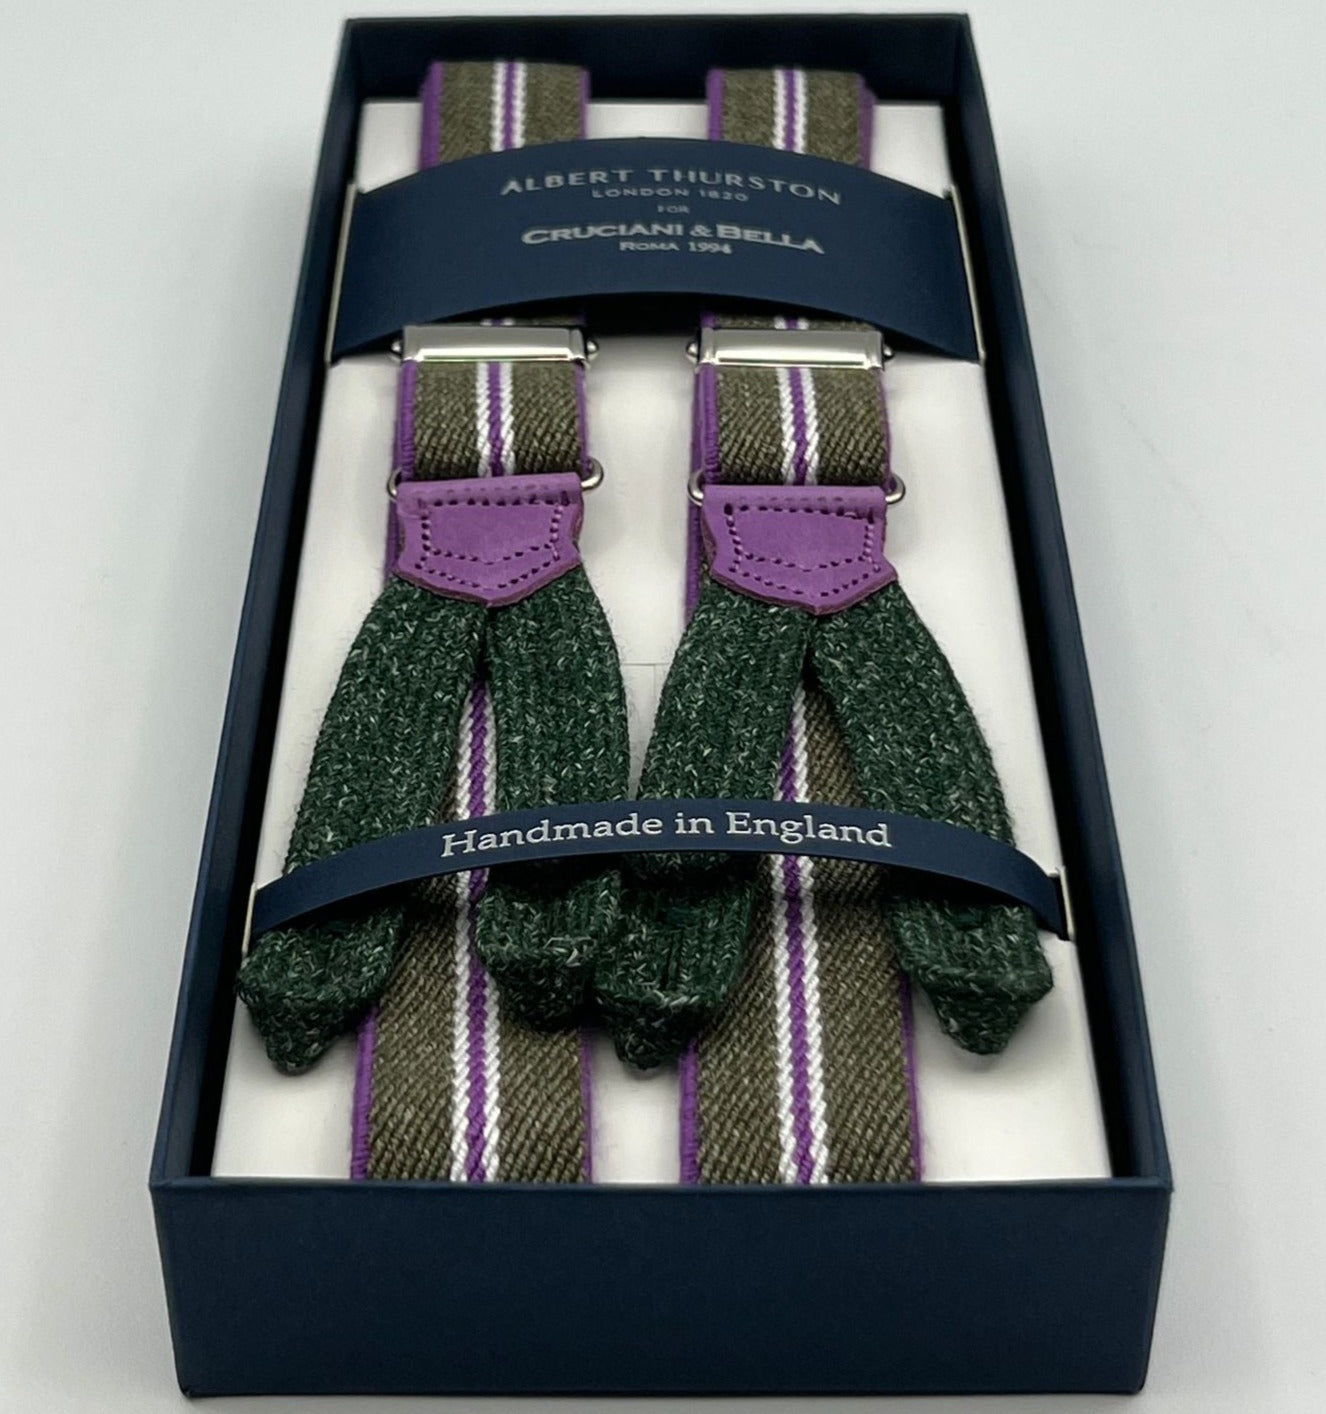 Albert Thurston for Cruciani & Bella Made in England Adjustable Sizing 25 mm elastic braces Green,Lilac and White Stripes  Braid ends Y-Shaped Nickel  Fittings Size: XL